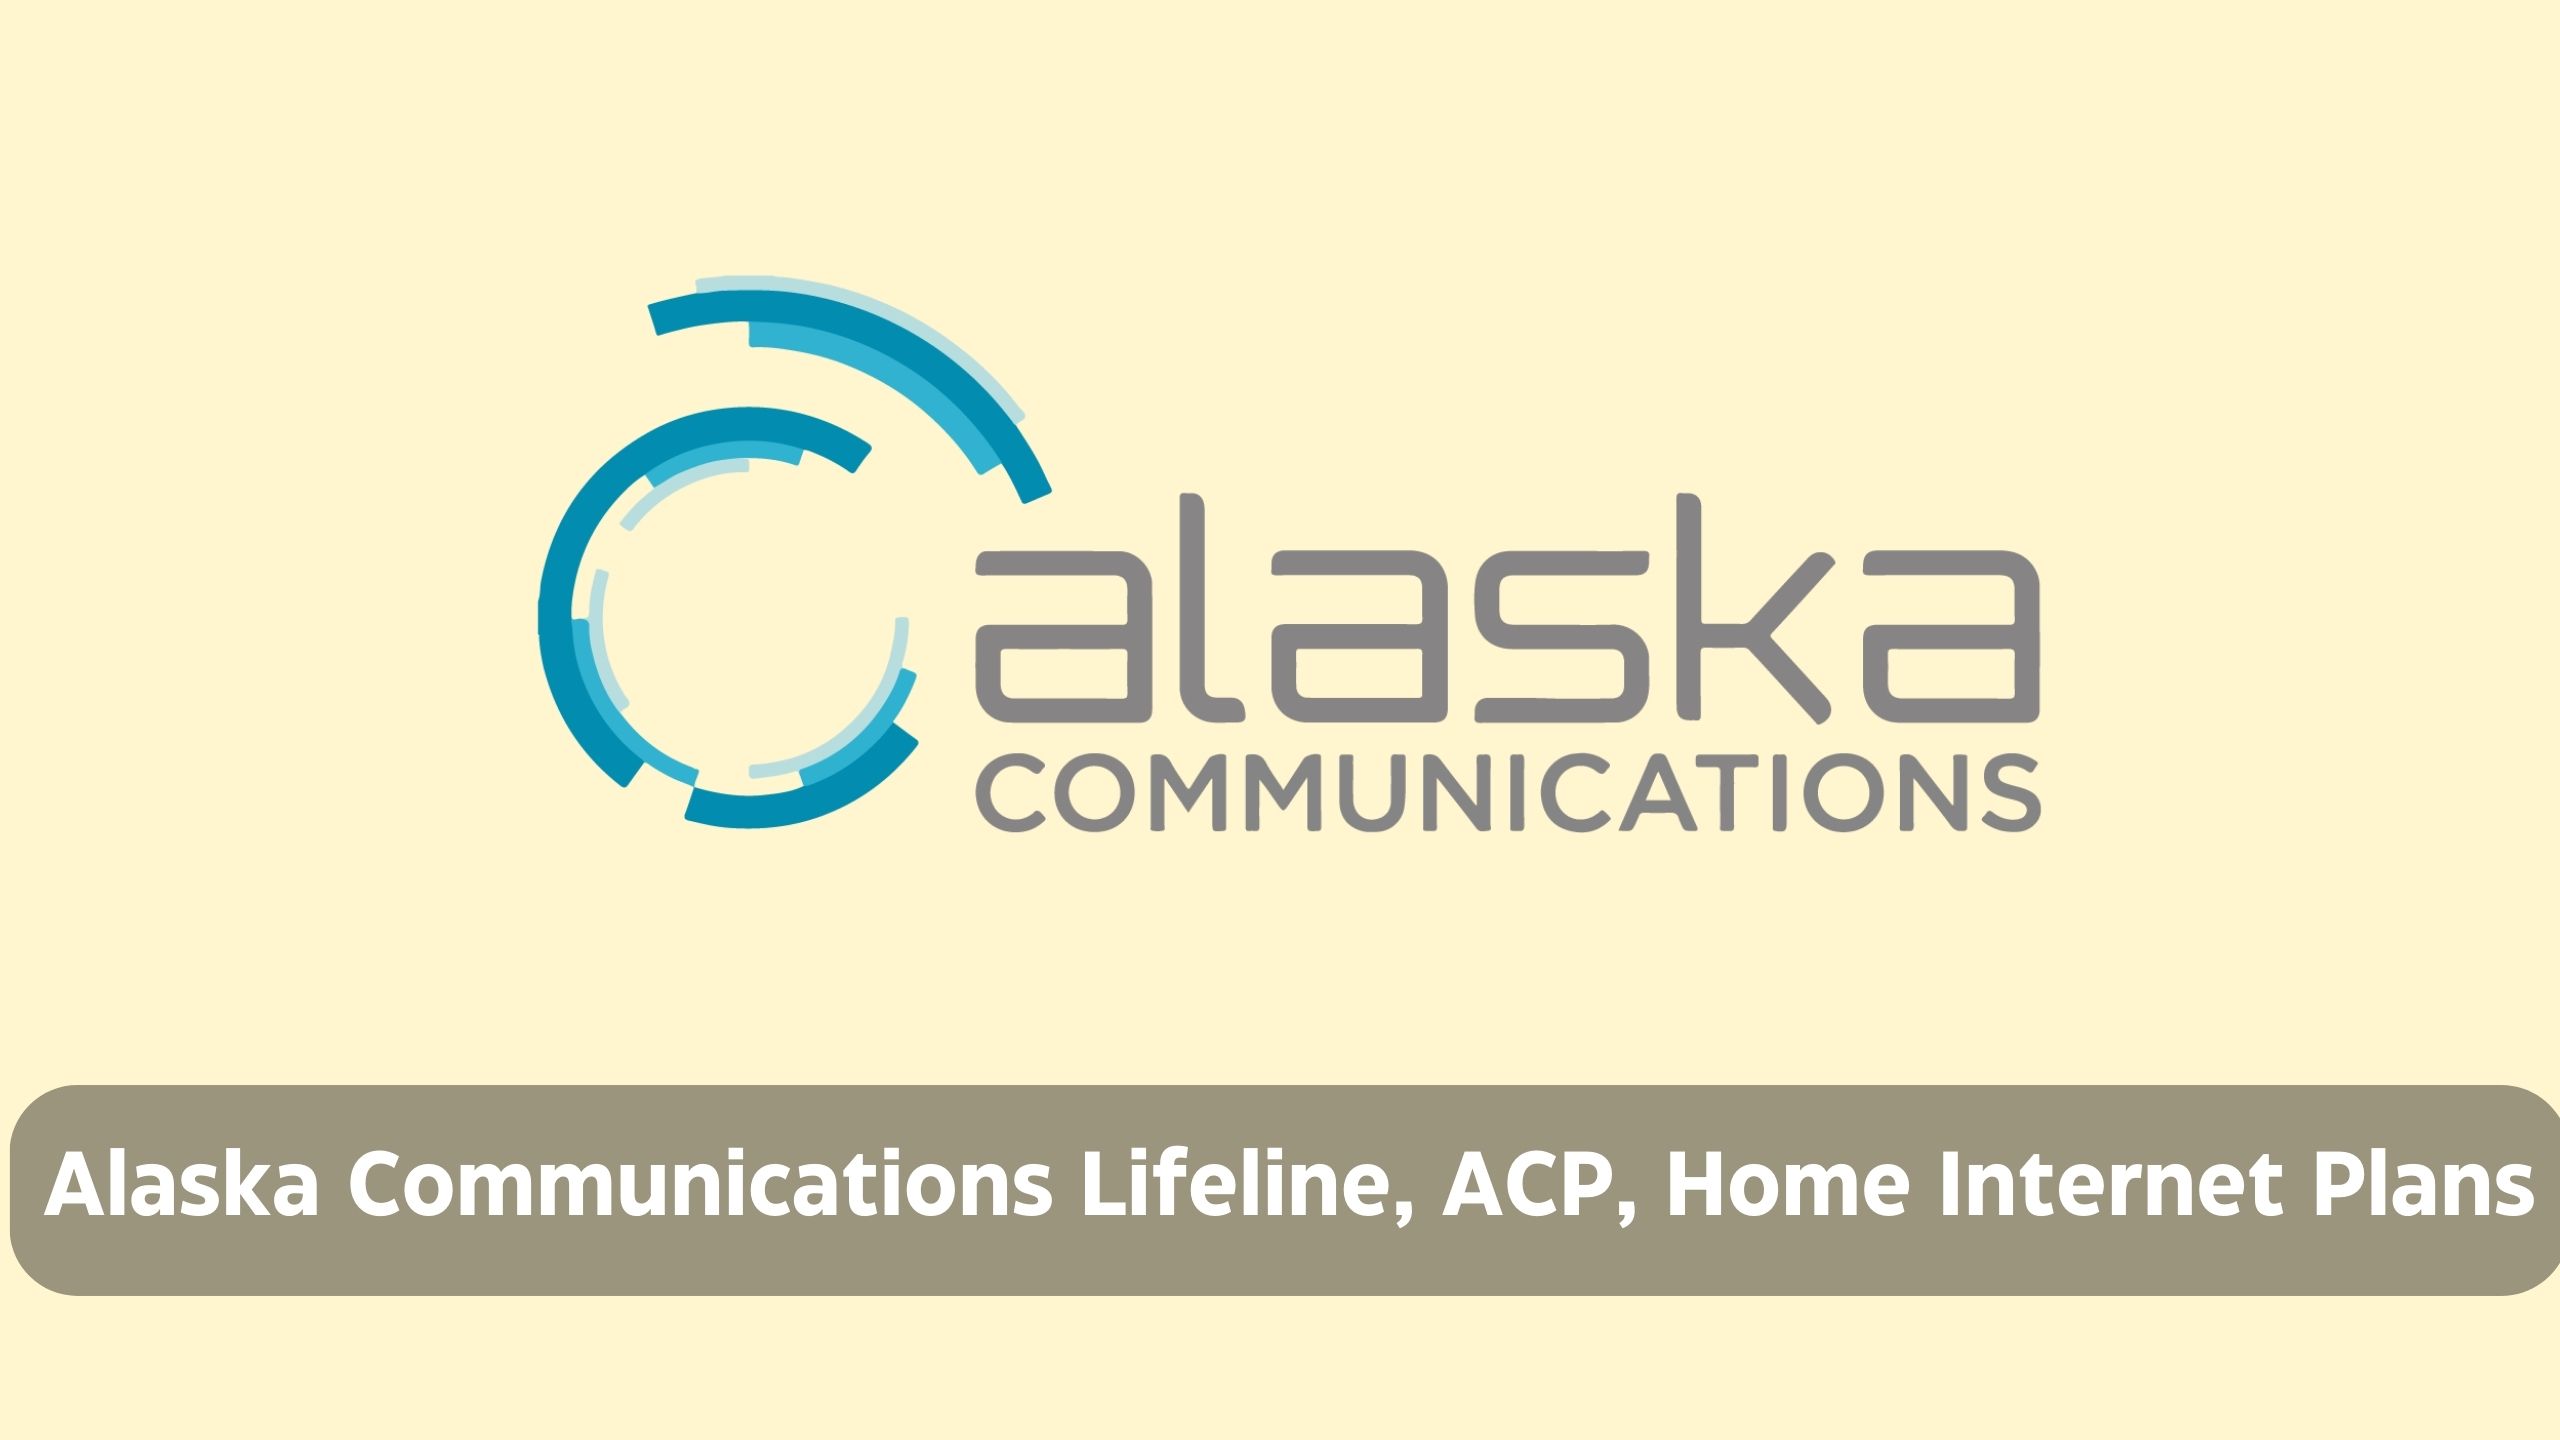 Alaska Communications Lifeline, ACP and Home Internet Plans | Eligibility and Application Process